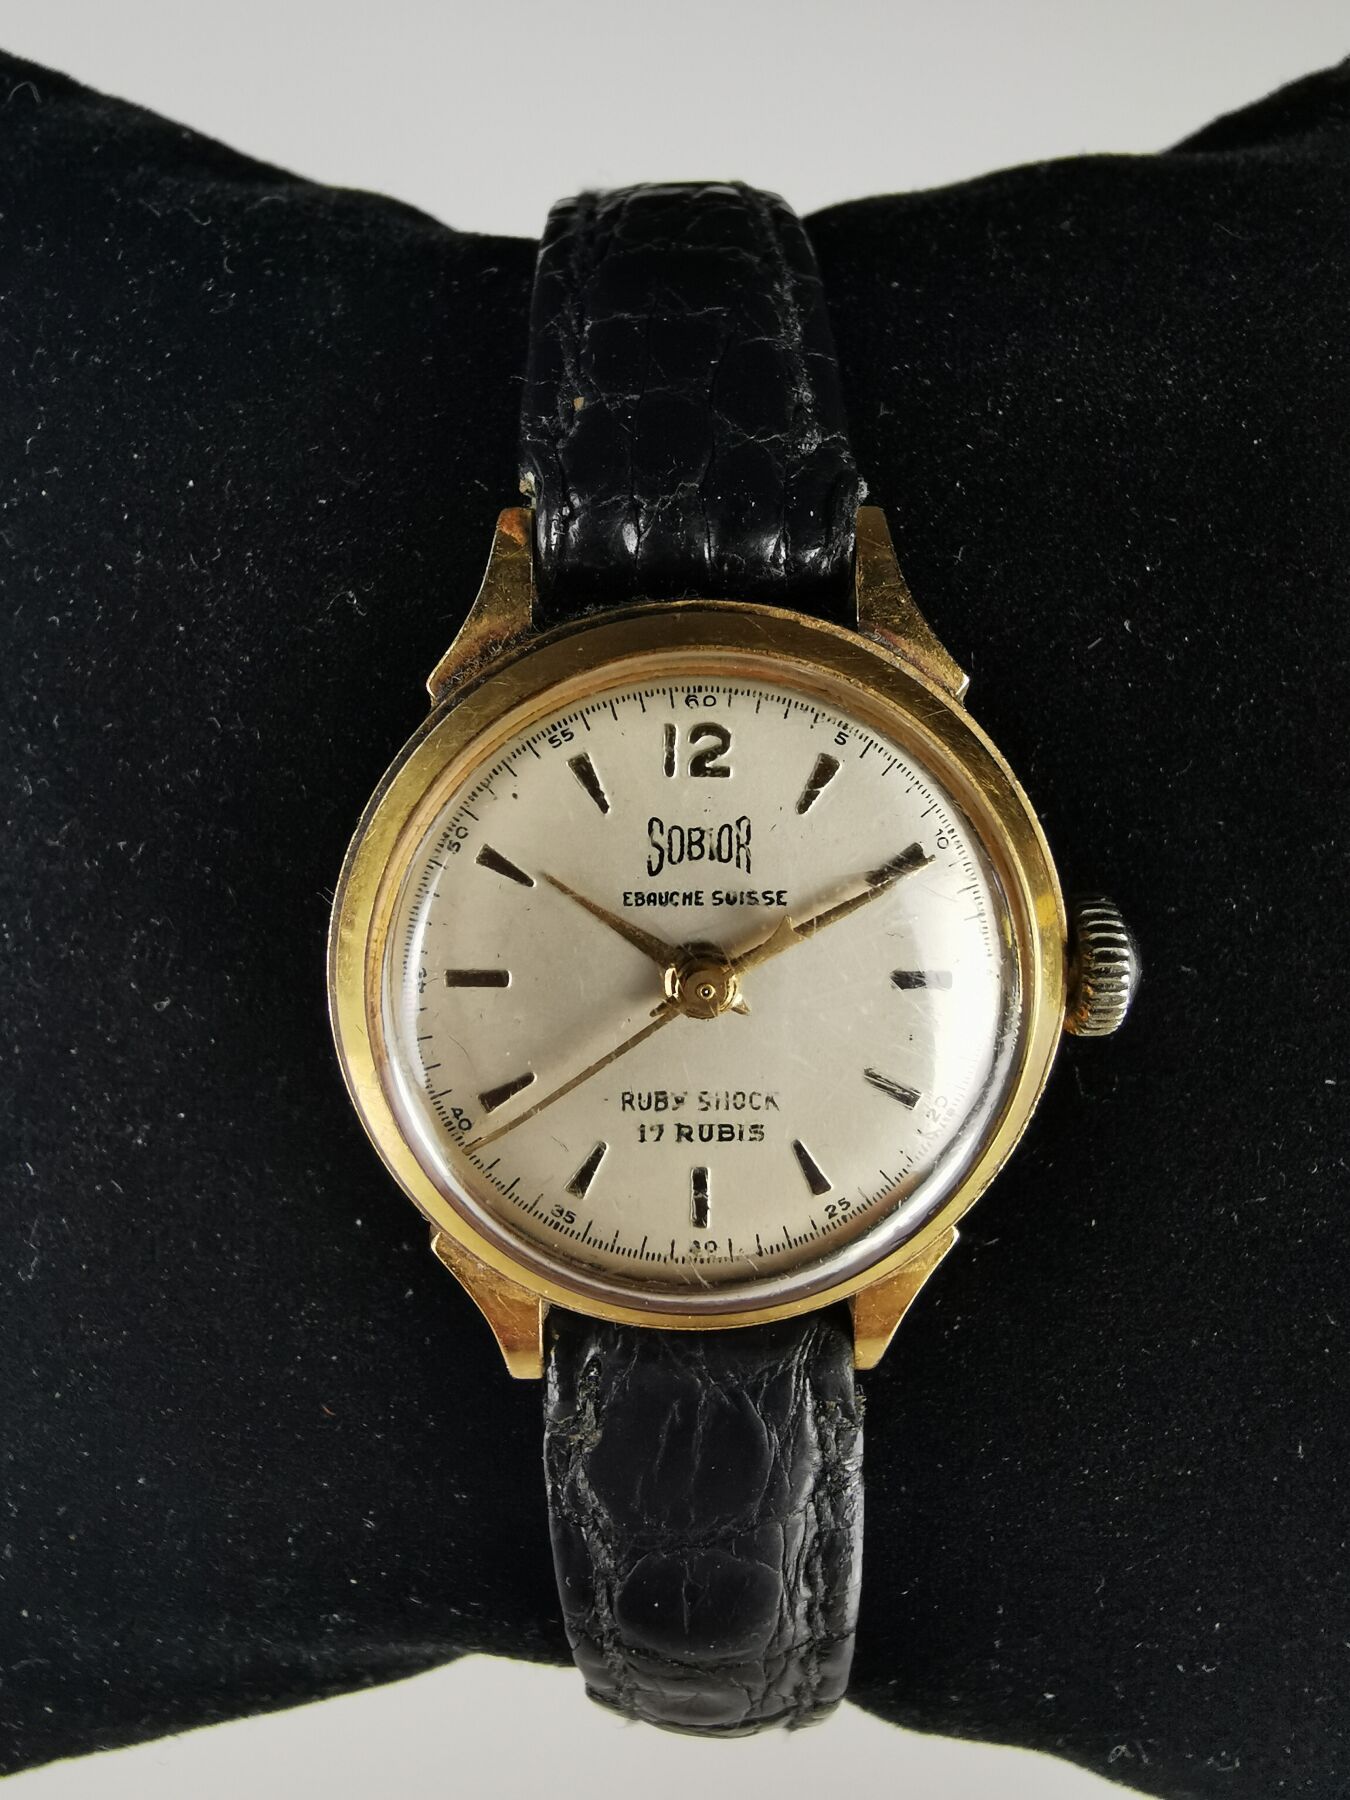 Null SOGNIOR.

Woman's wristwatch, the case in yellow gold, the dial with champa&hellip;